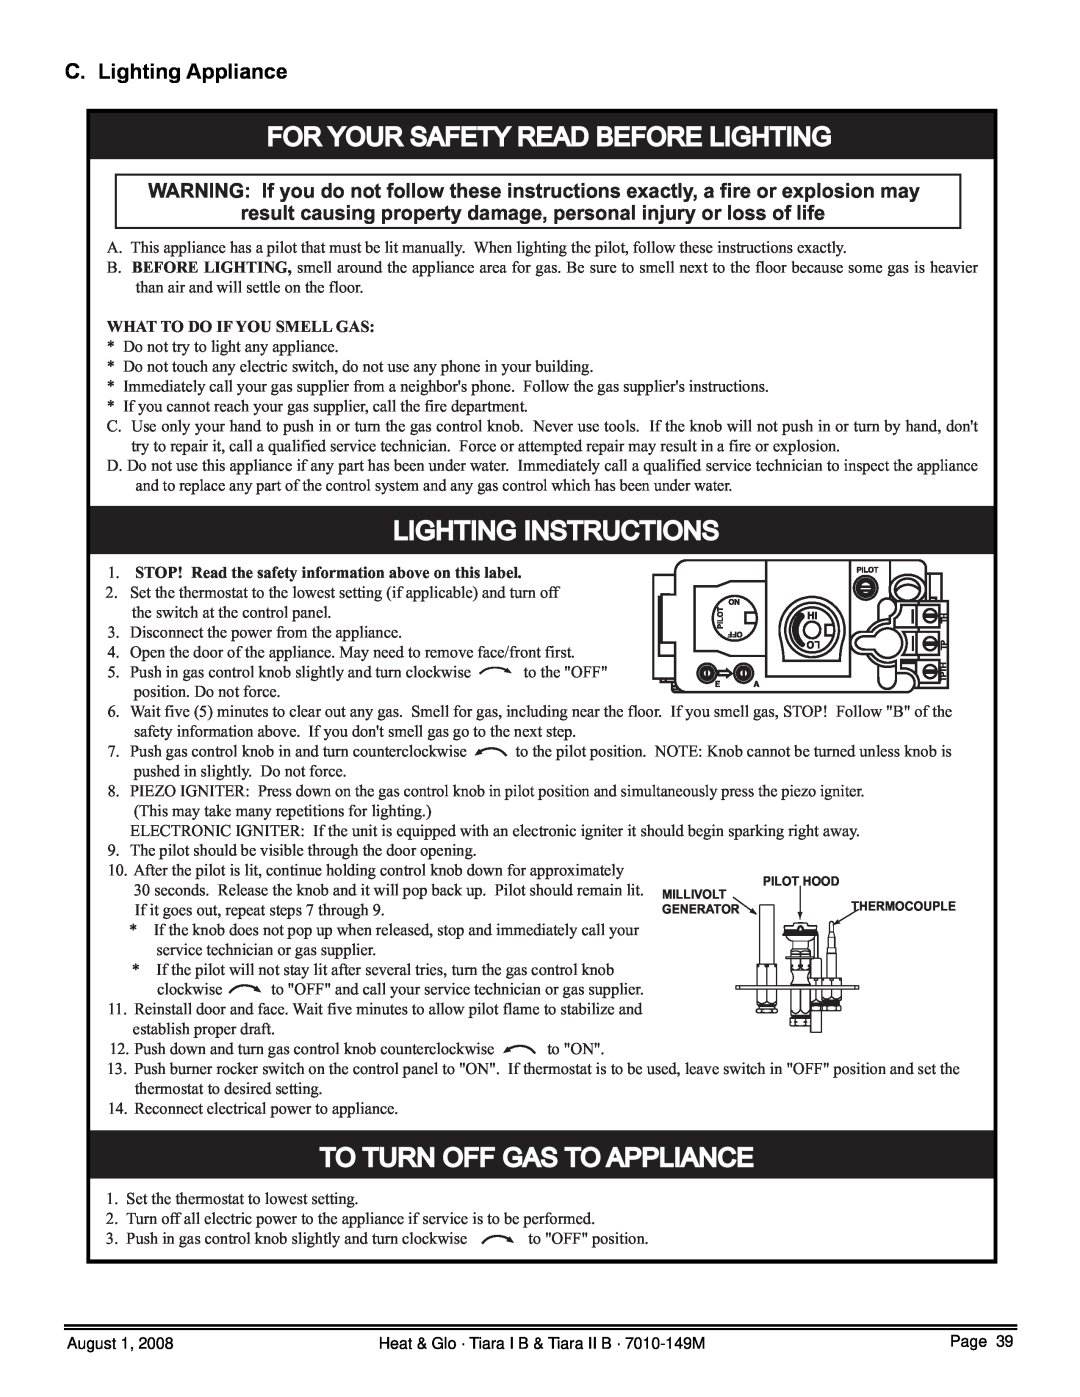 Hearth and Home Technologies TIARA I-B C. Lighting Appliance, For Your Safety Read Before Lighting, Lighting Instructions 